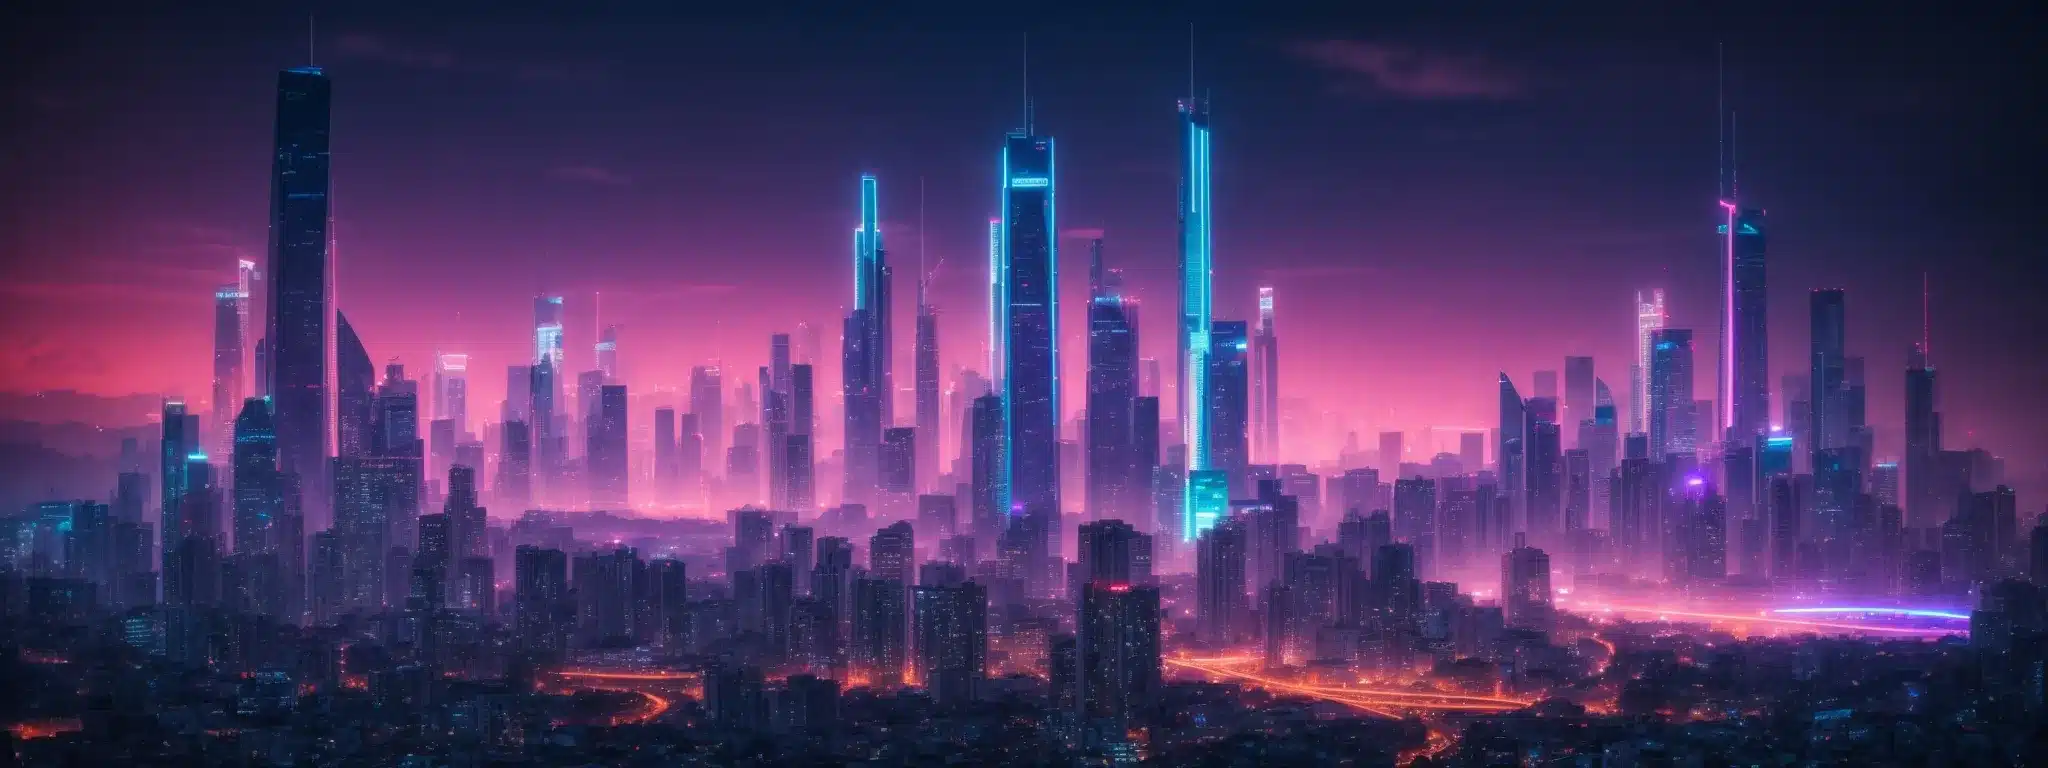 A Futuristic City Skyline Glows With Neon Lights Under A Twilight Sky, Symbolizing The Cutting-Edge Journey Of Brand Innovation.